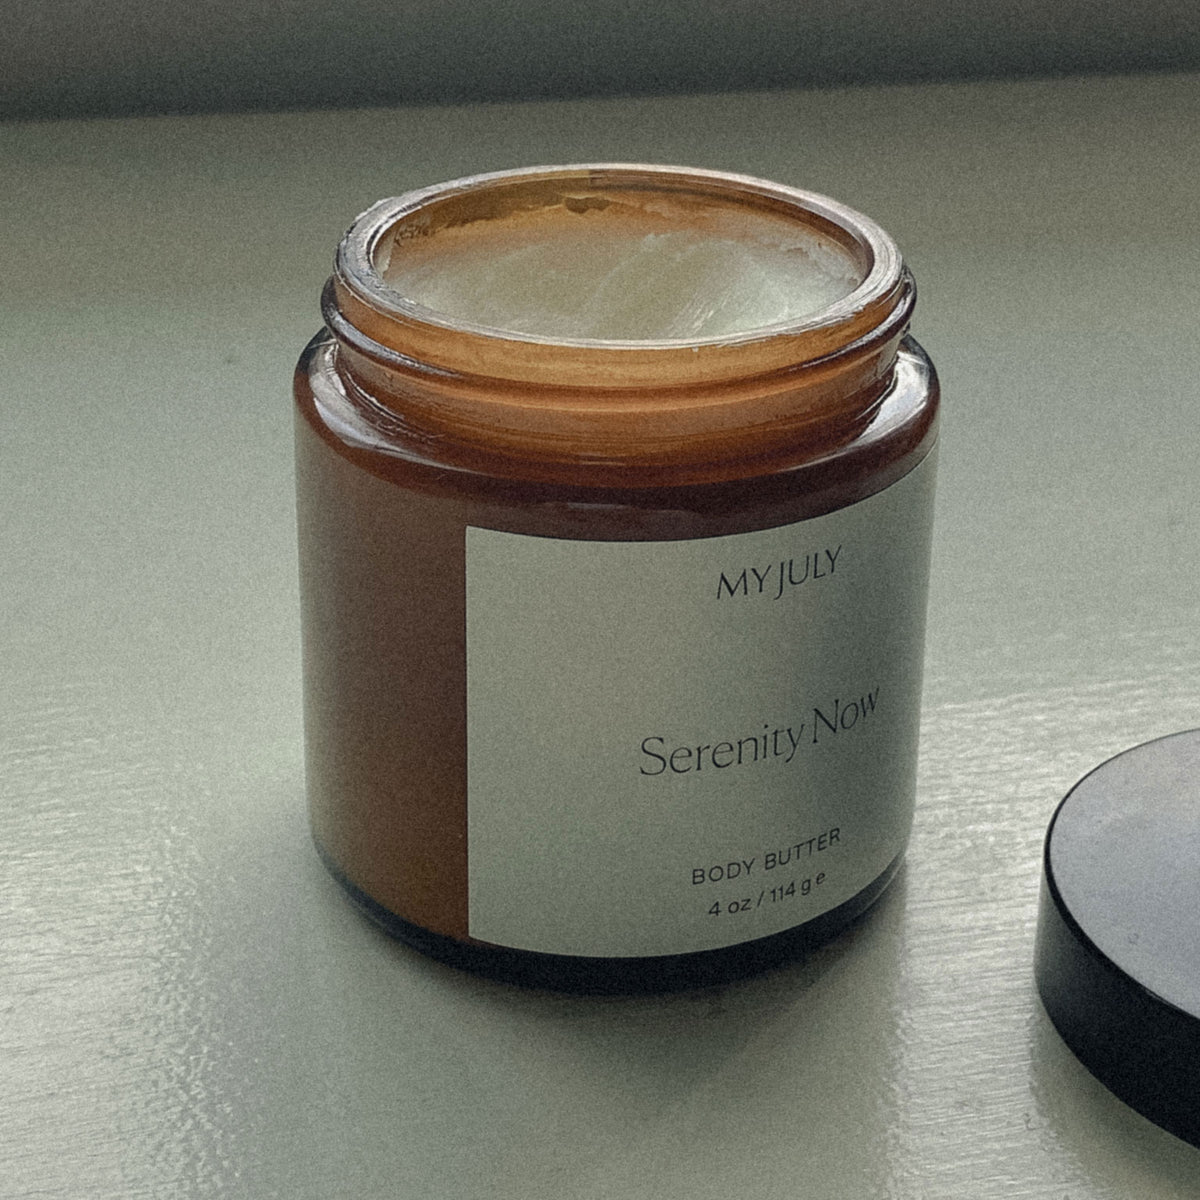 MyJuly Body Butter - Serenity Now